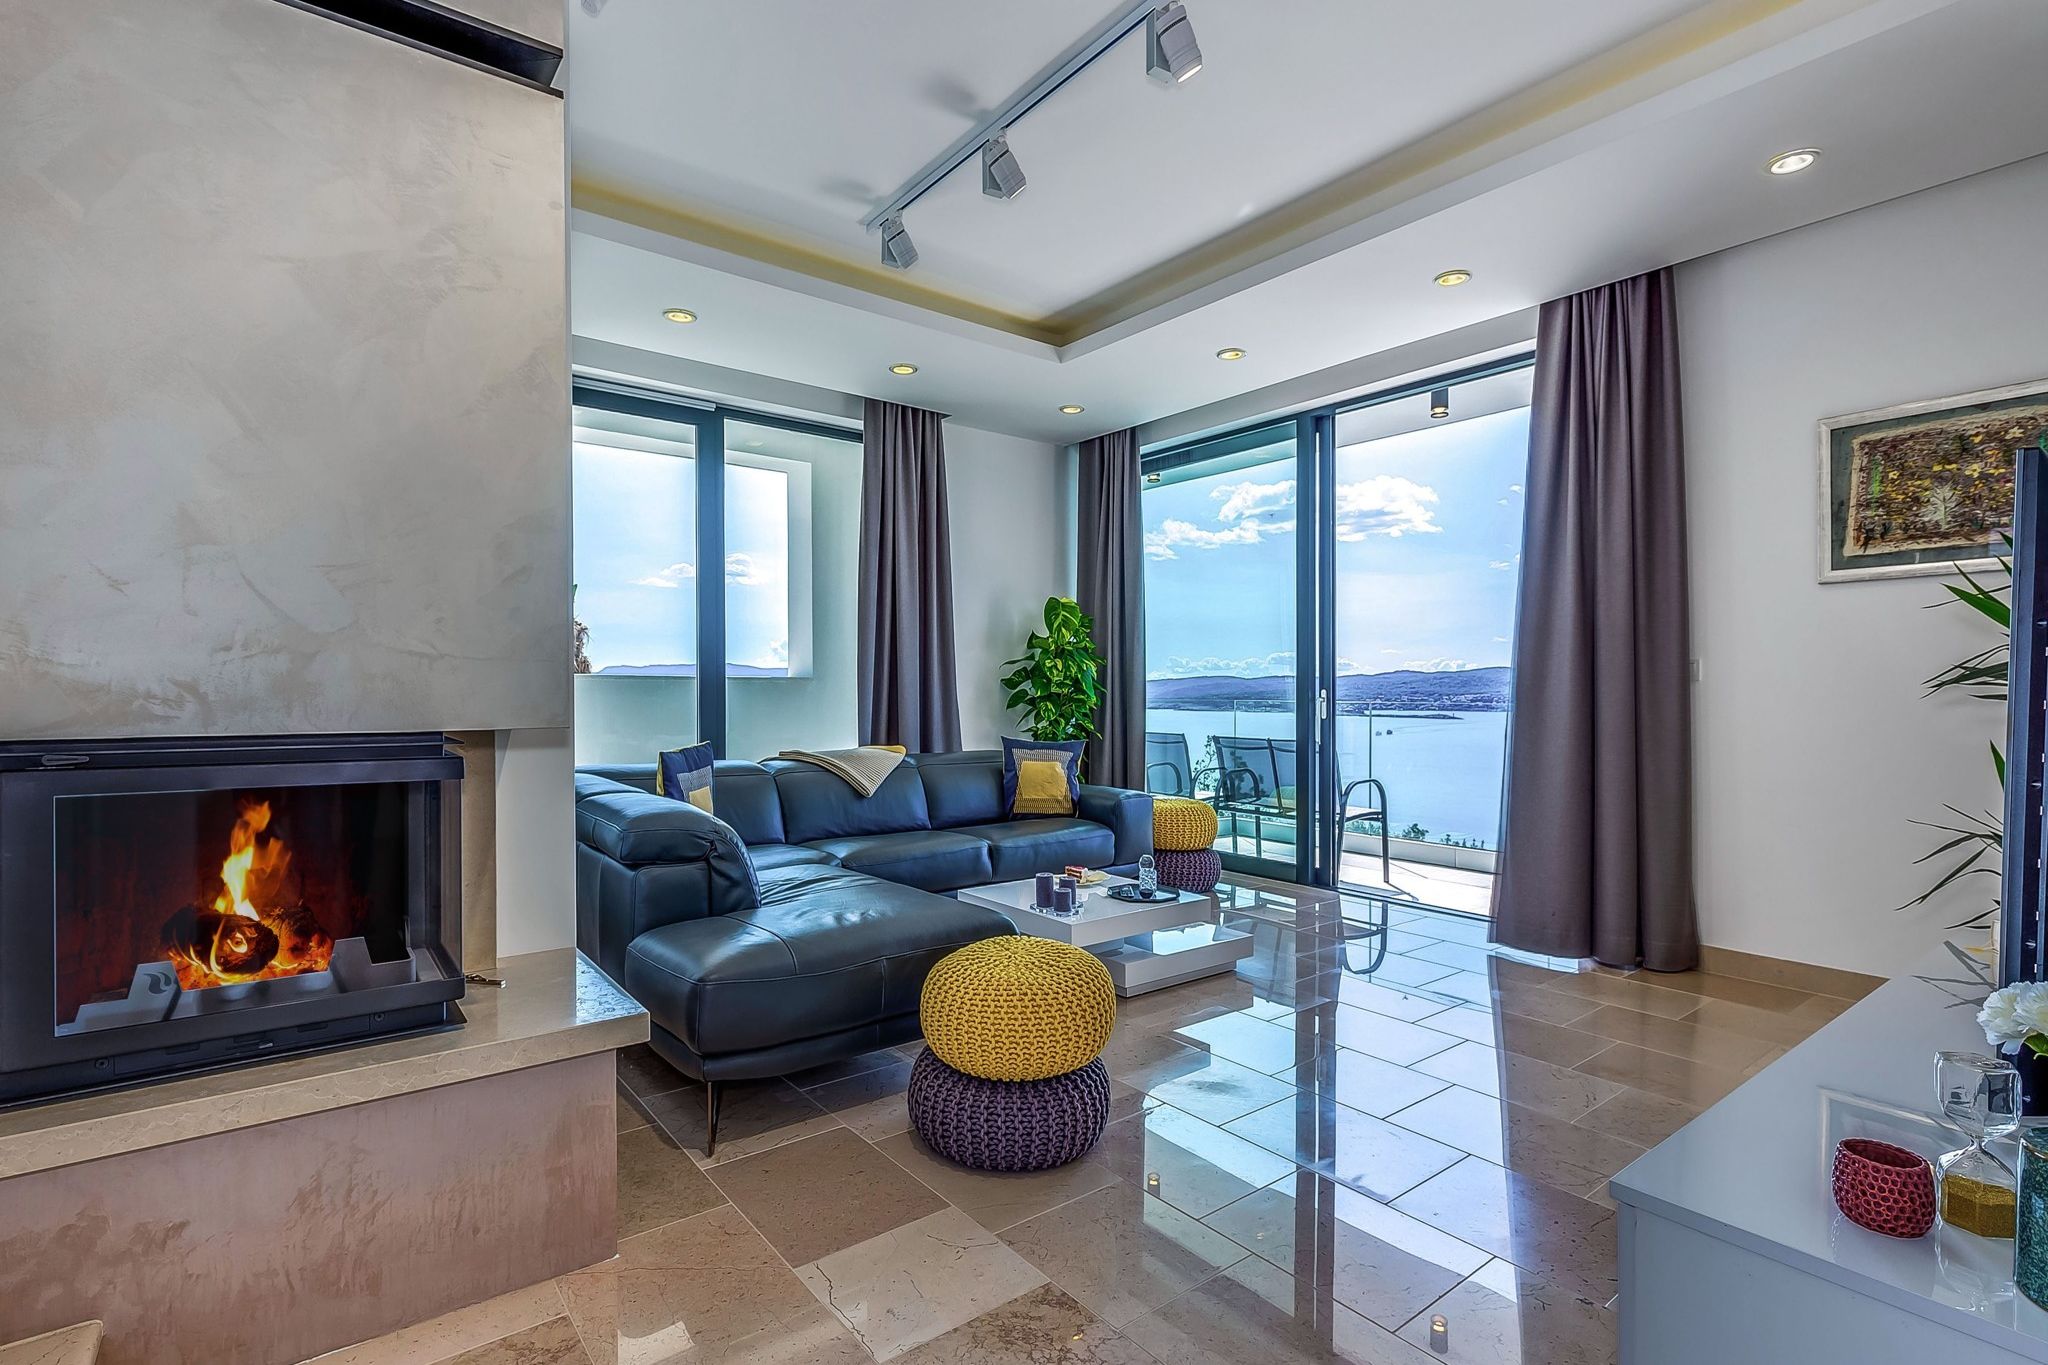 Luxurious Villa in Crikvenica with Wellness Spa